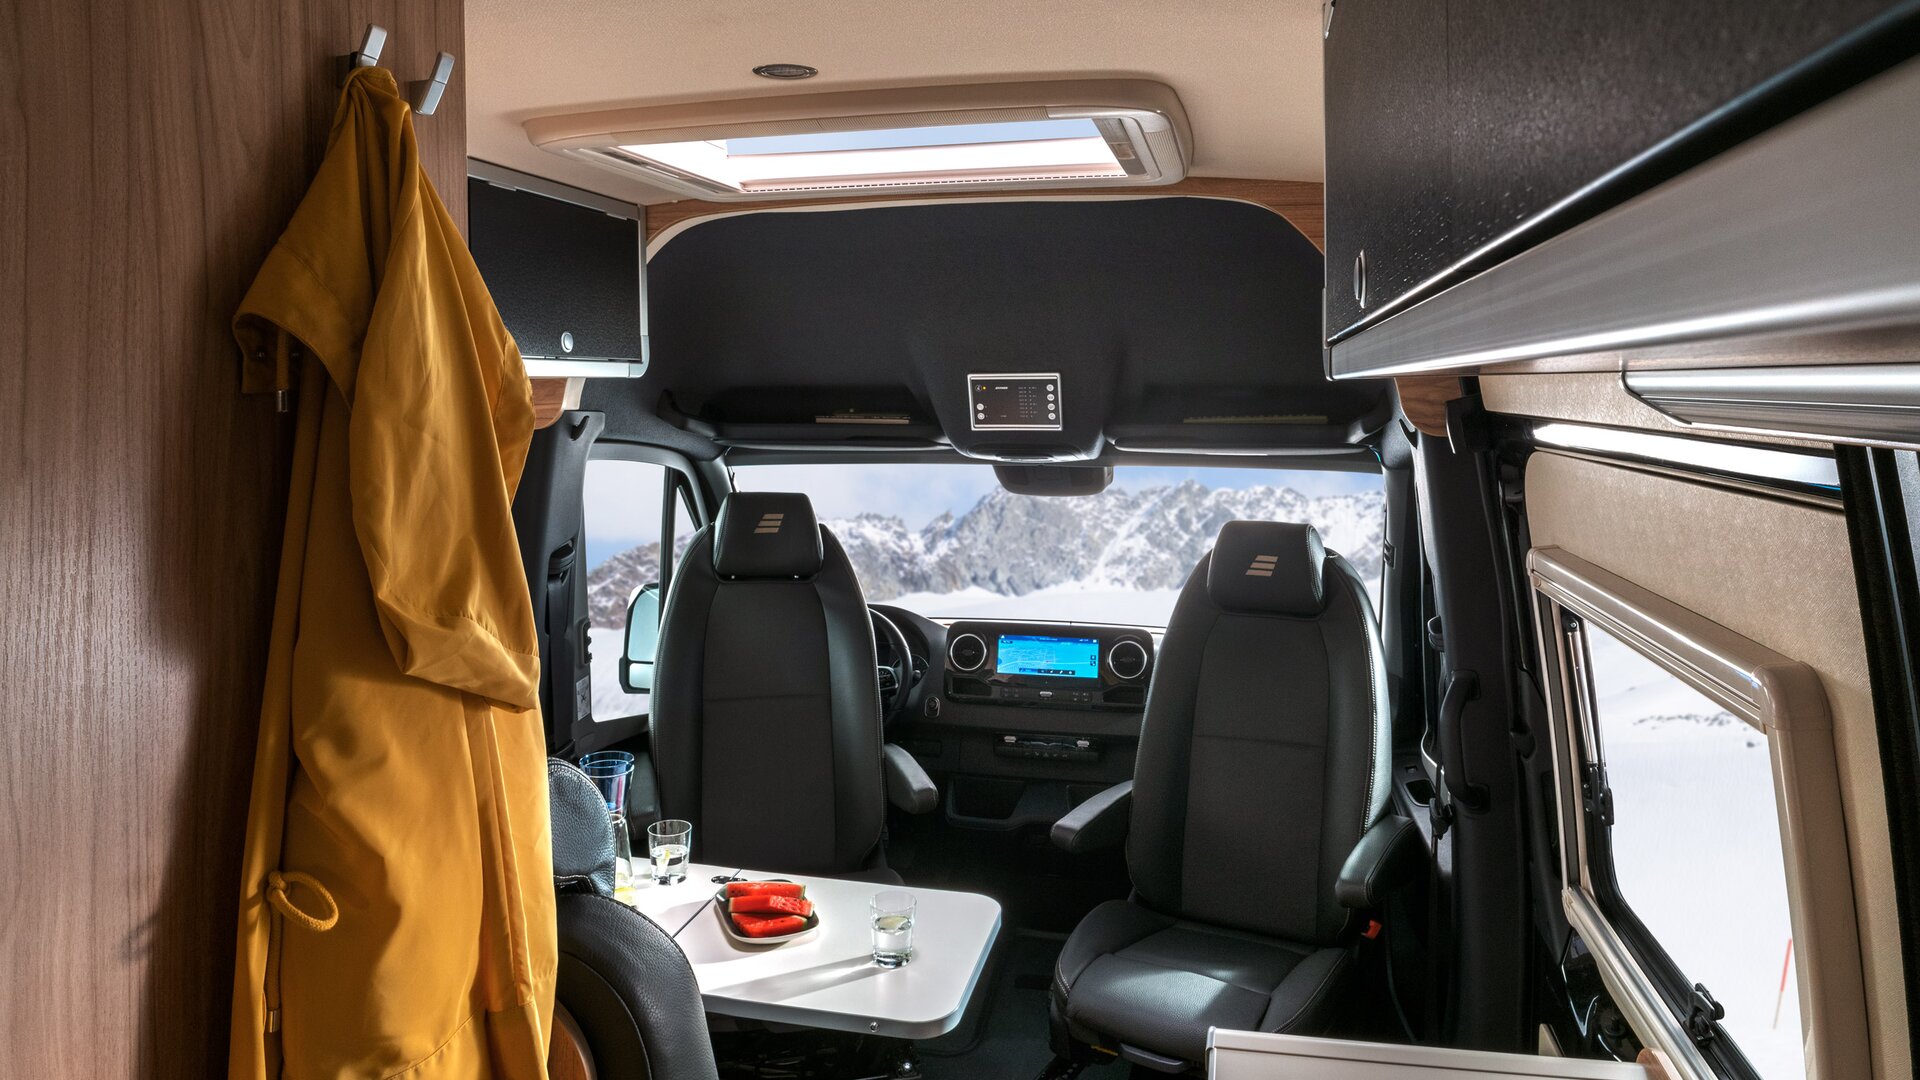 Interior in the HYMER Grand Canyon S CrossOver: yellow bathrobe on hooks, seating area with occupied table, driver's area